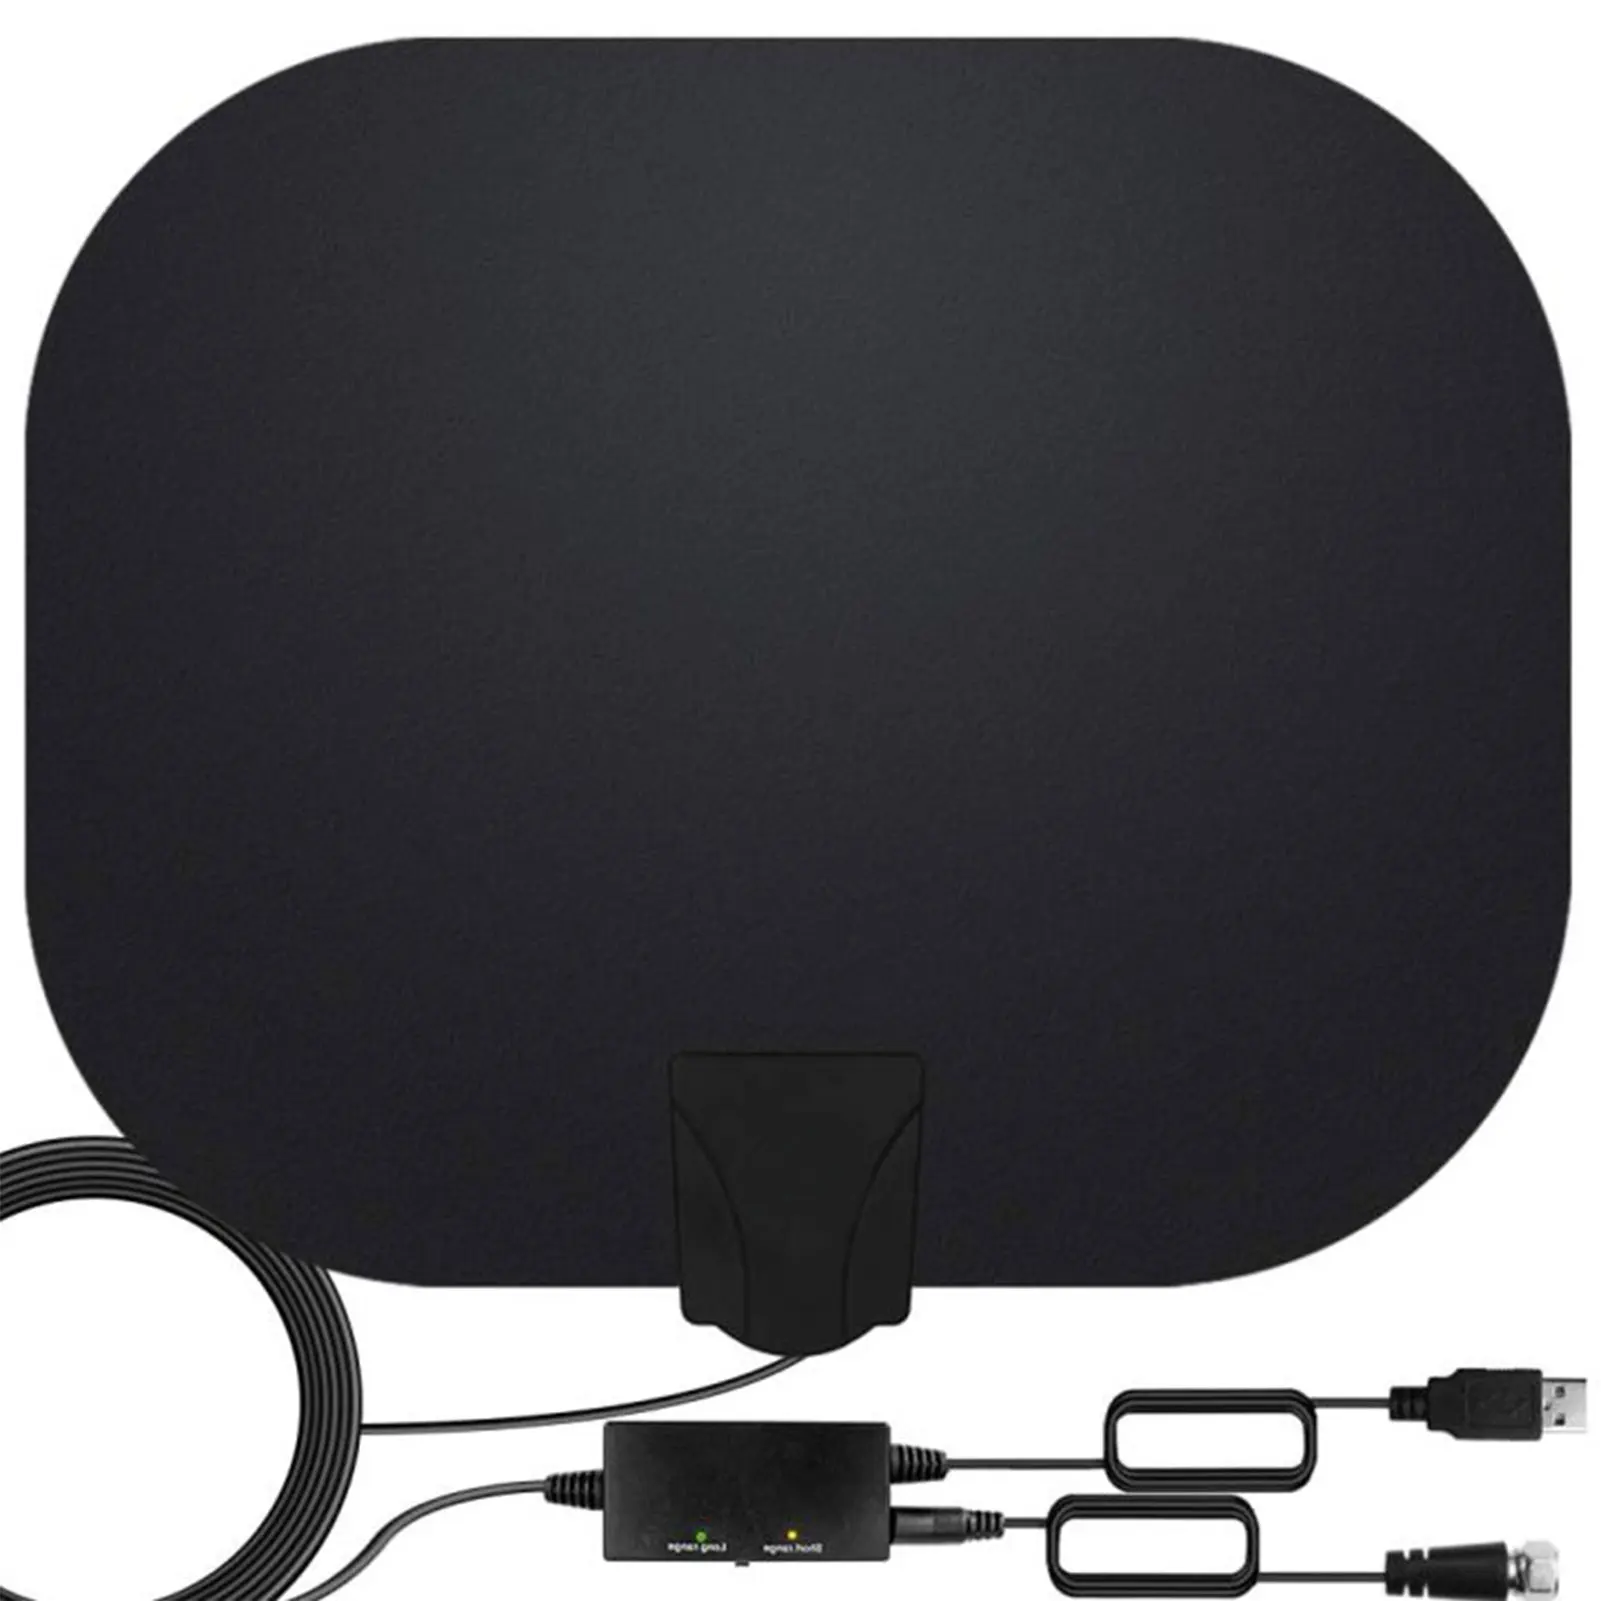 

Smart TV Antenna Indoor HD Digital 4K 1080p Coaxial Cable Amplified HDTV 4K DVB-T2 Freeview Isdb-tb Local Channel Broadcast